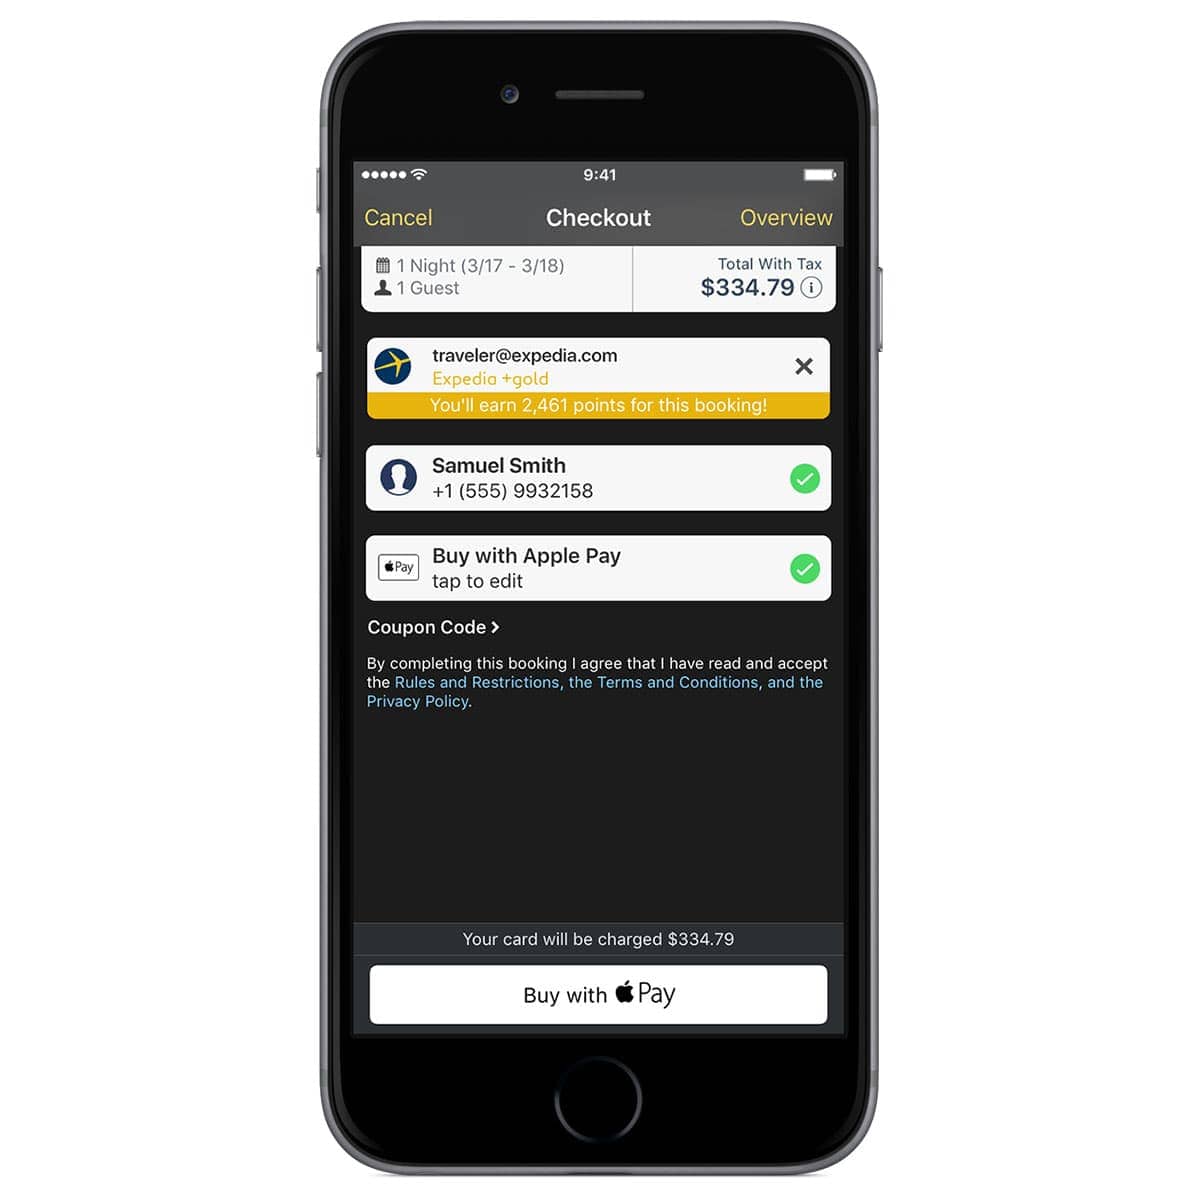 How to use Apple Pay on Expedia app